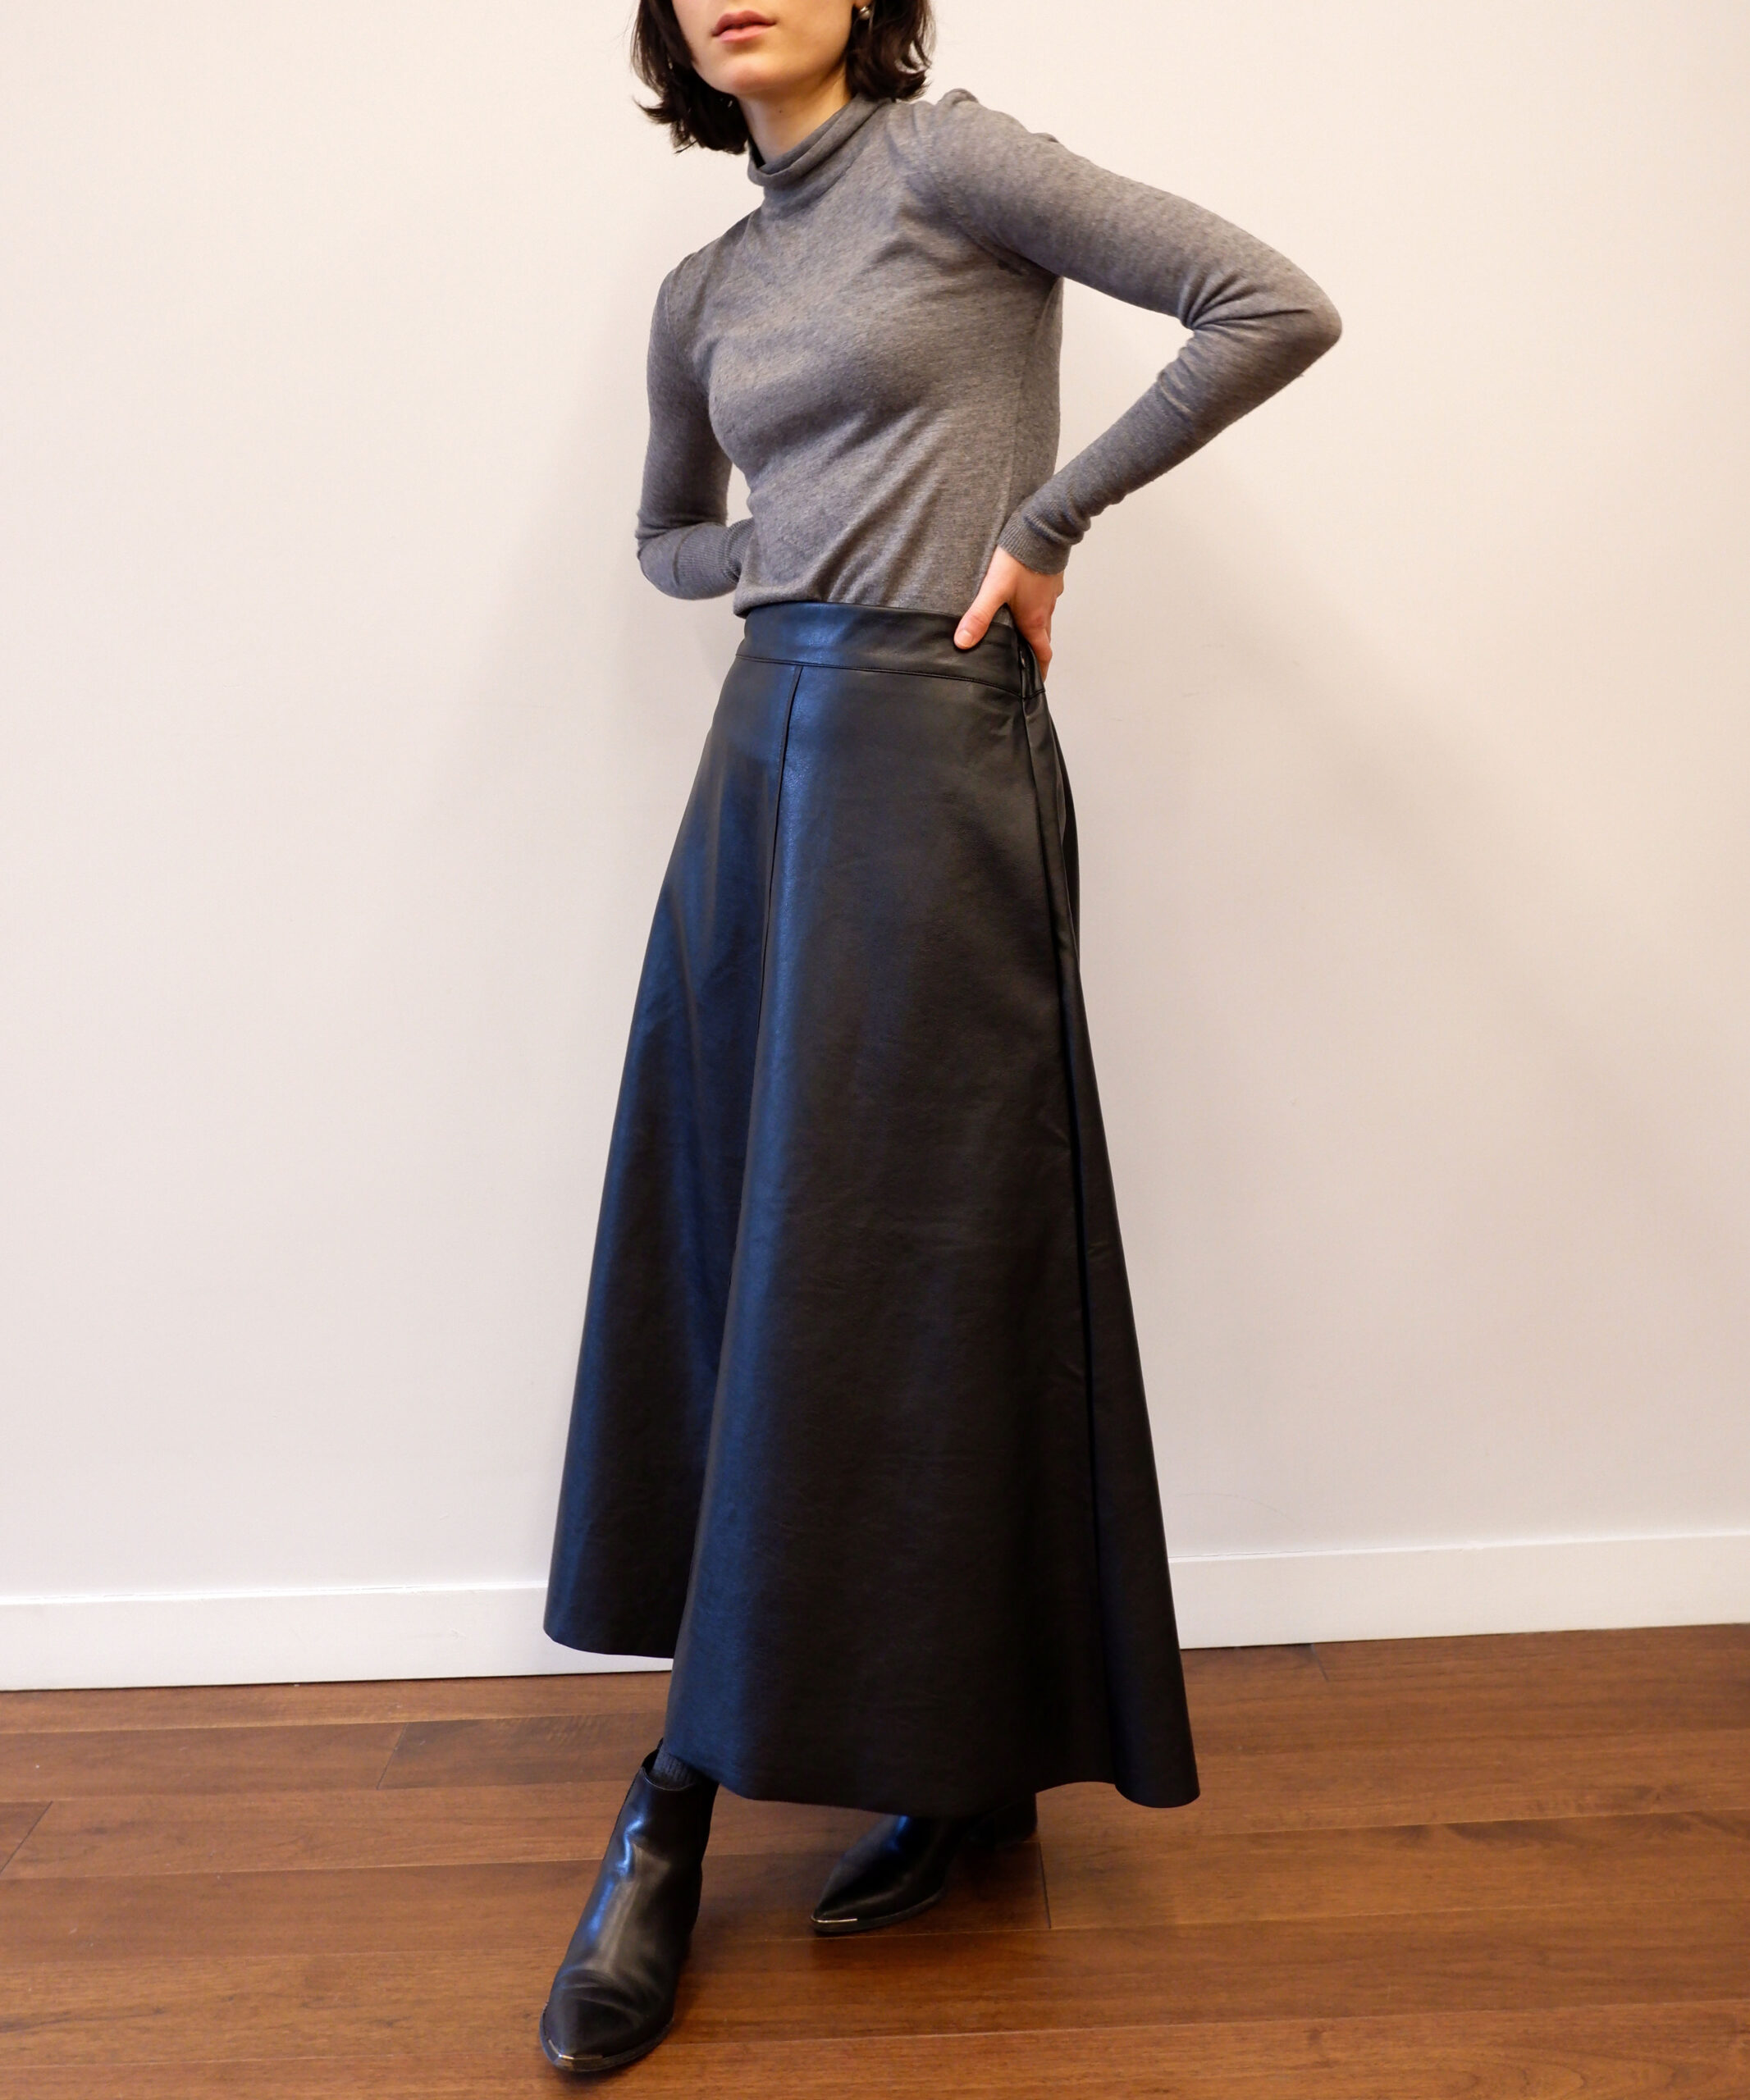 Black vegan leather midi skirt from The Dallant, Korean fashion online shopping site, fashion item for transitional weather in korea